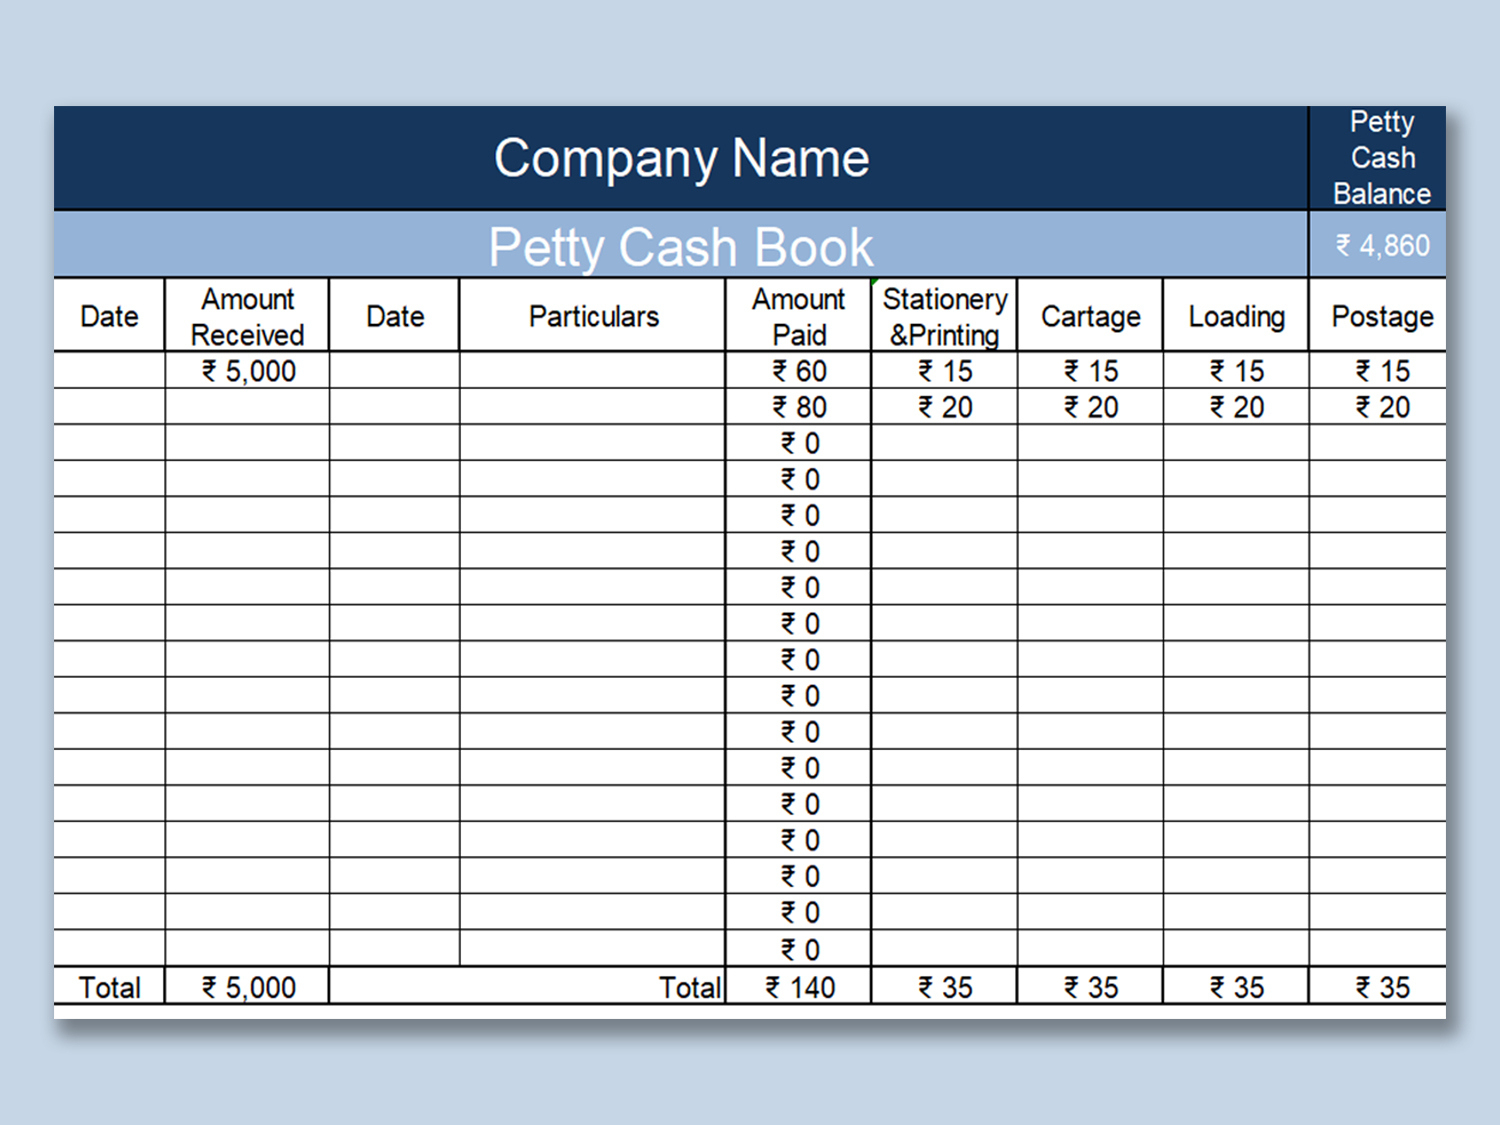 Excel Of Petty Cash Book.xlsx | Wps Free Templates pertaining to Free Cash Book Template Printable